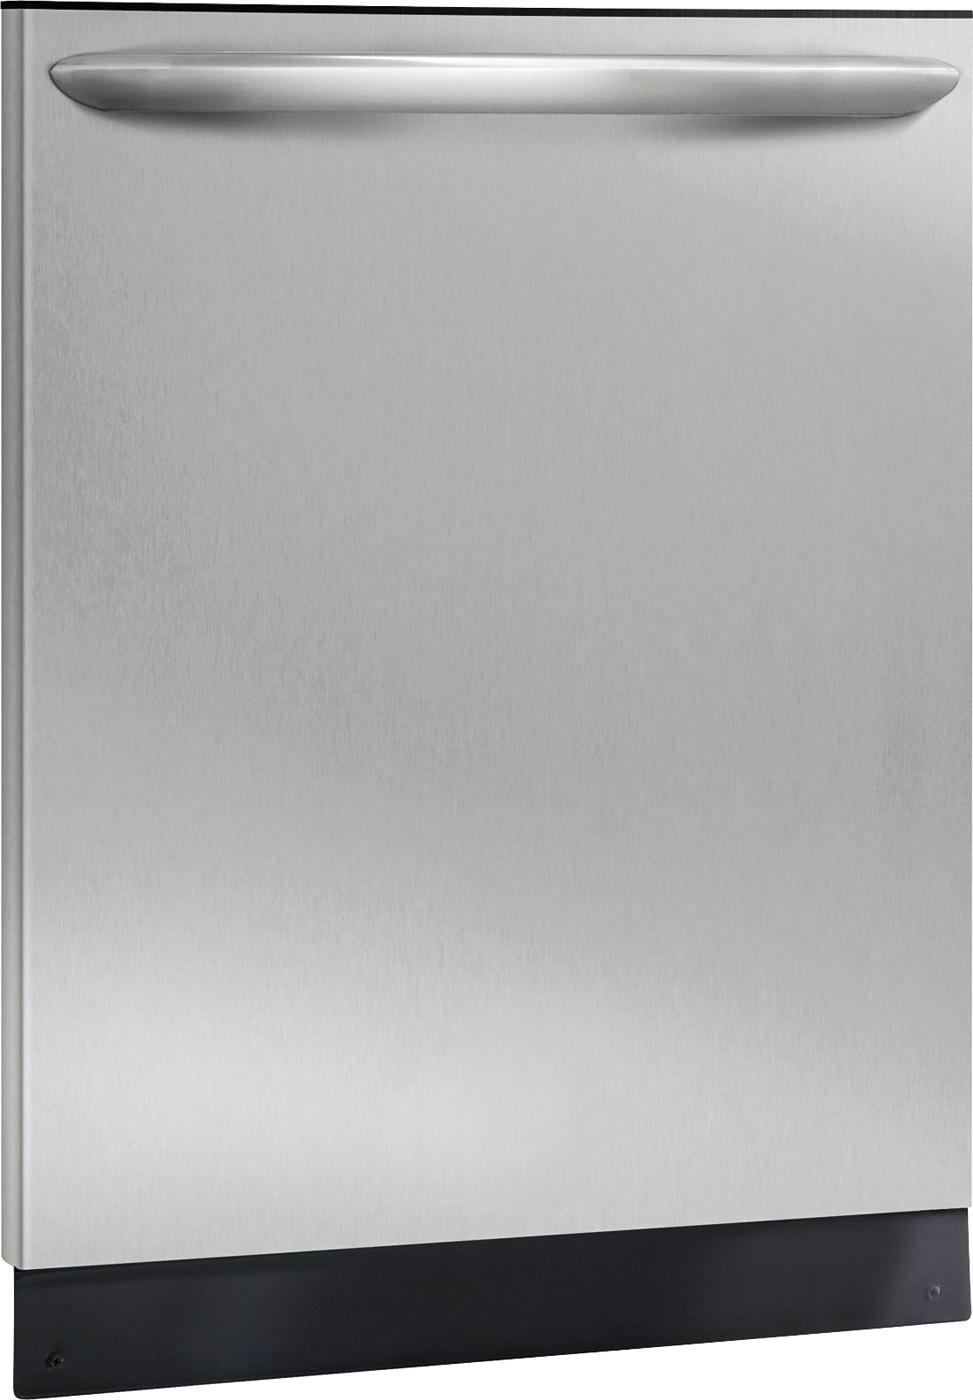 Angle View: Frigidaire 24" Built-in Dishwasher w/ 14 Place Setting, Silver